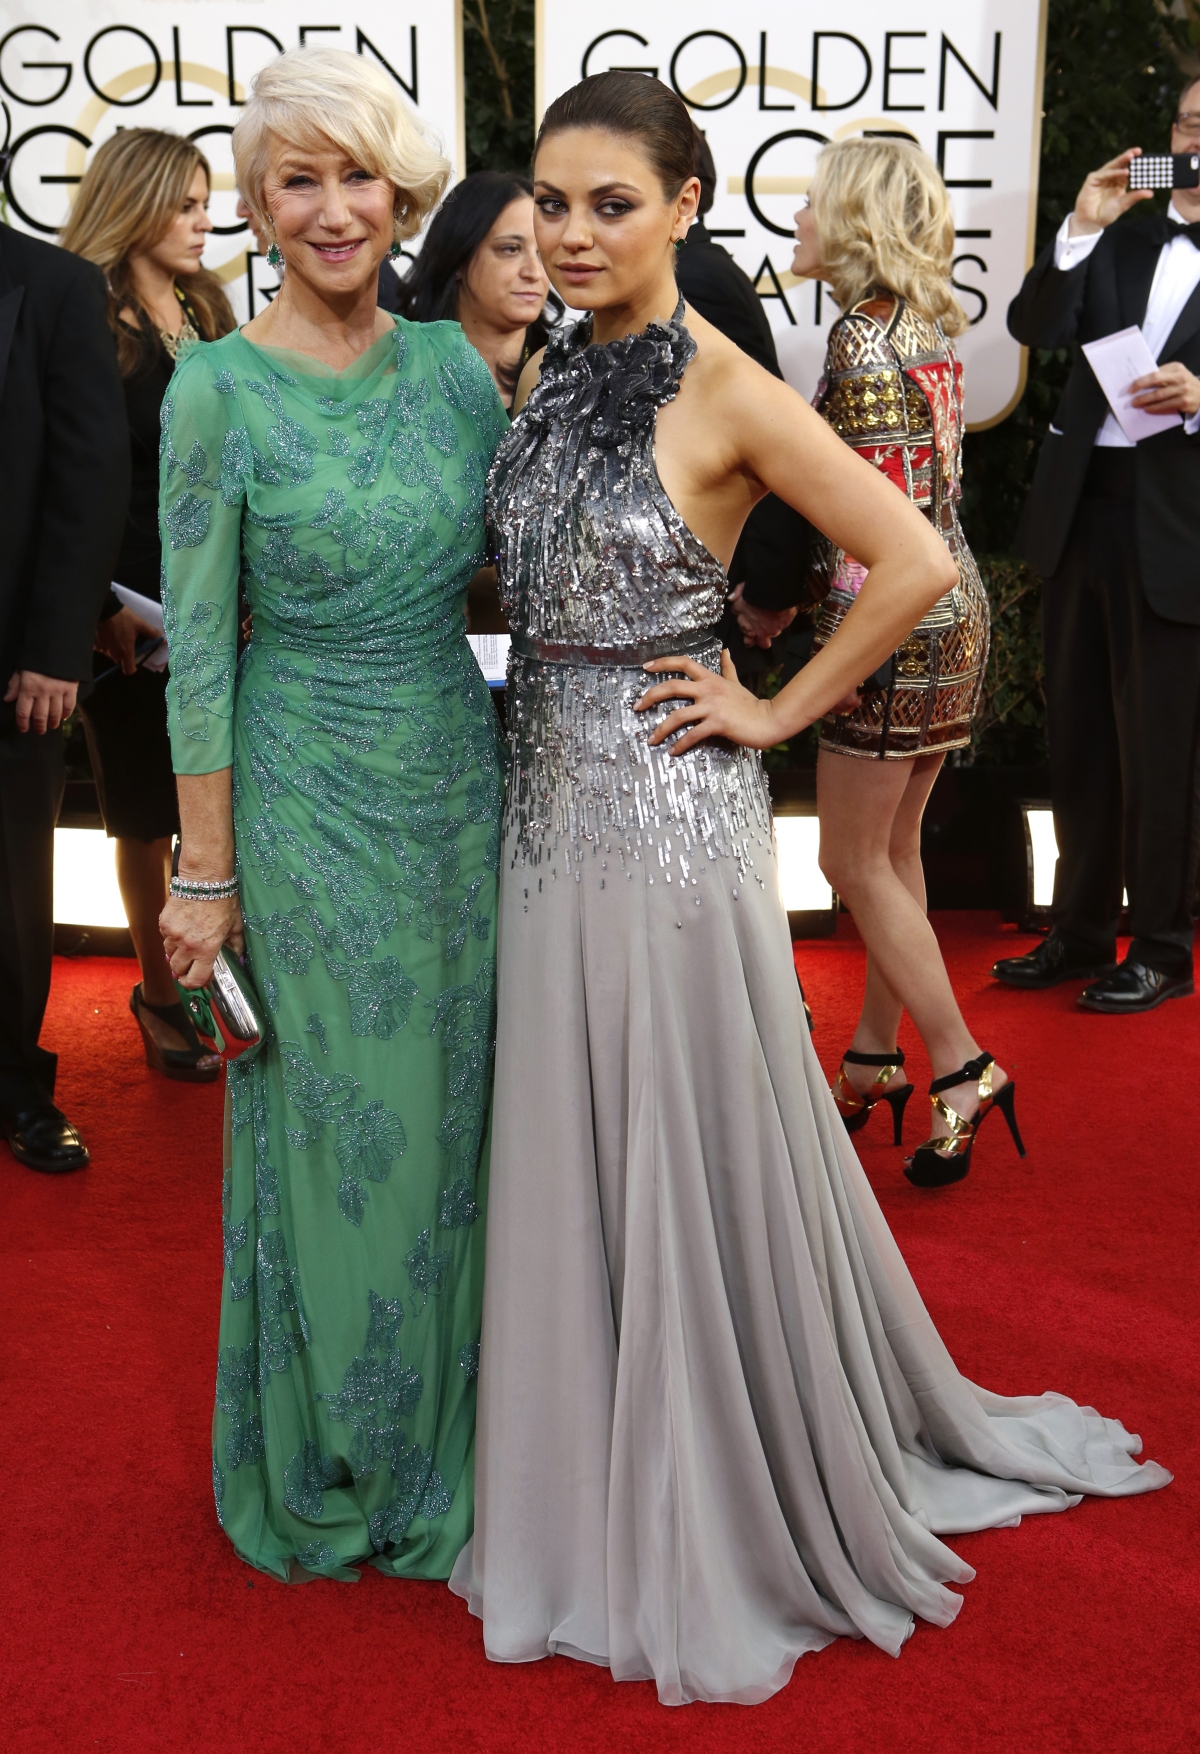 Actresses Helen Mirren L and Mila Kunis pose on the red carpet of Golden Globes.